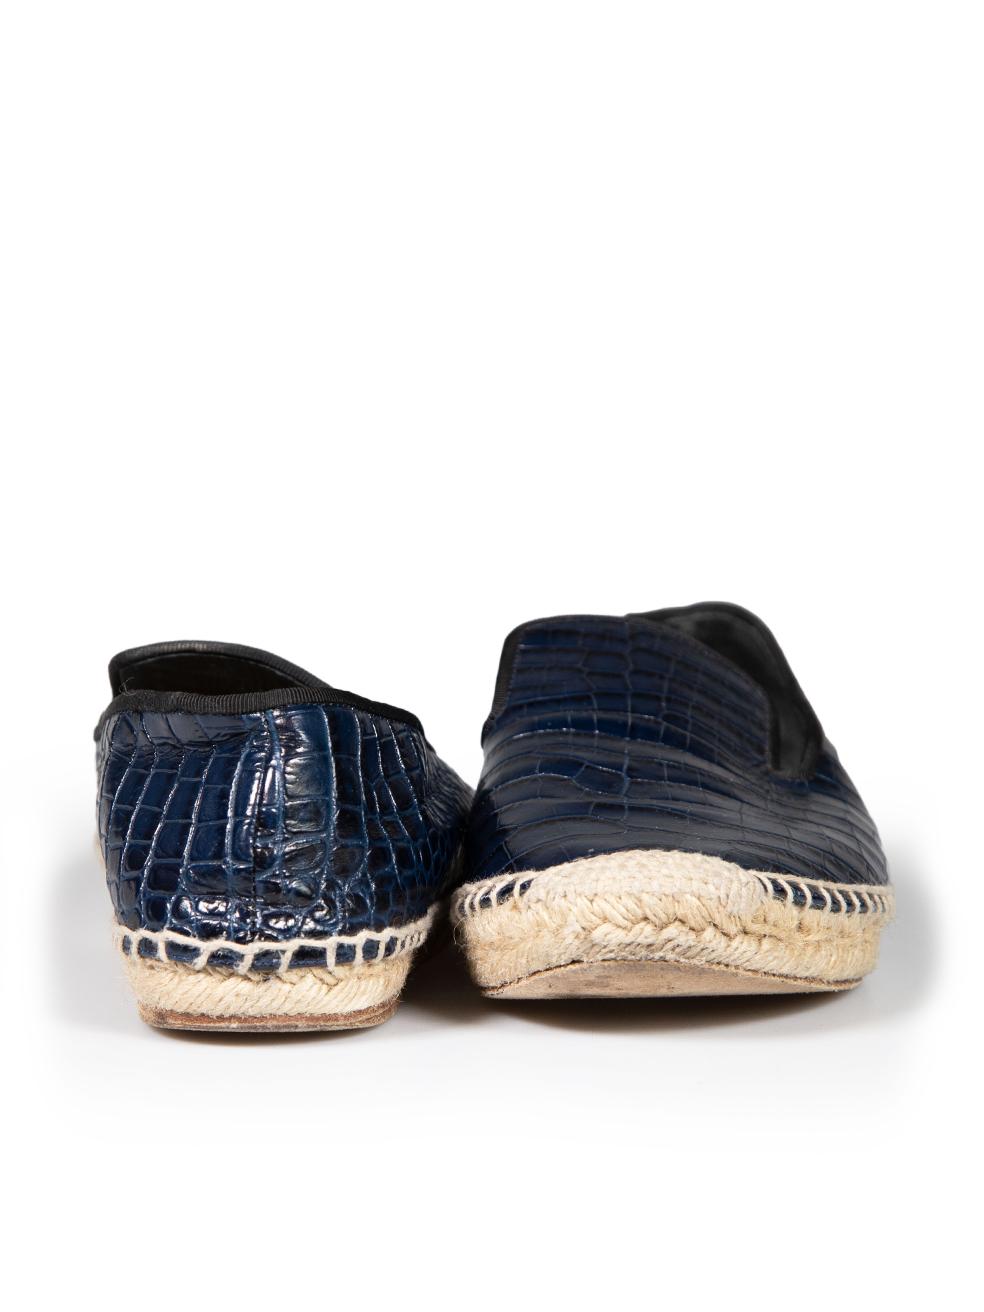 Céline Navy Leather Croc Embossed Espadrilles Size IT 36 In Good Condition For Sale In London, GB